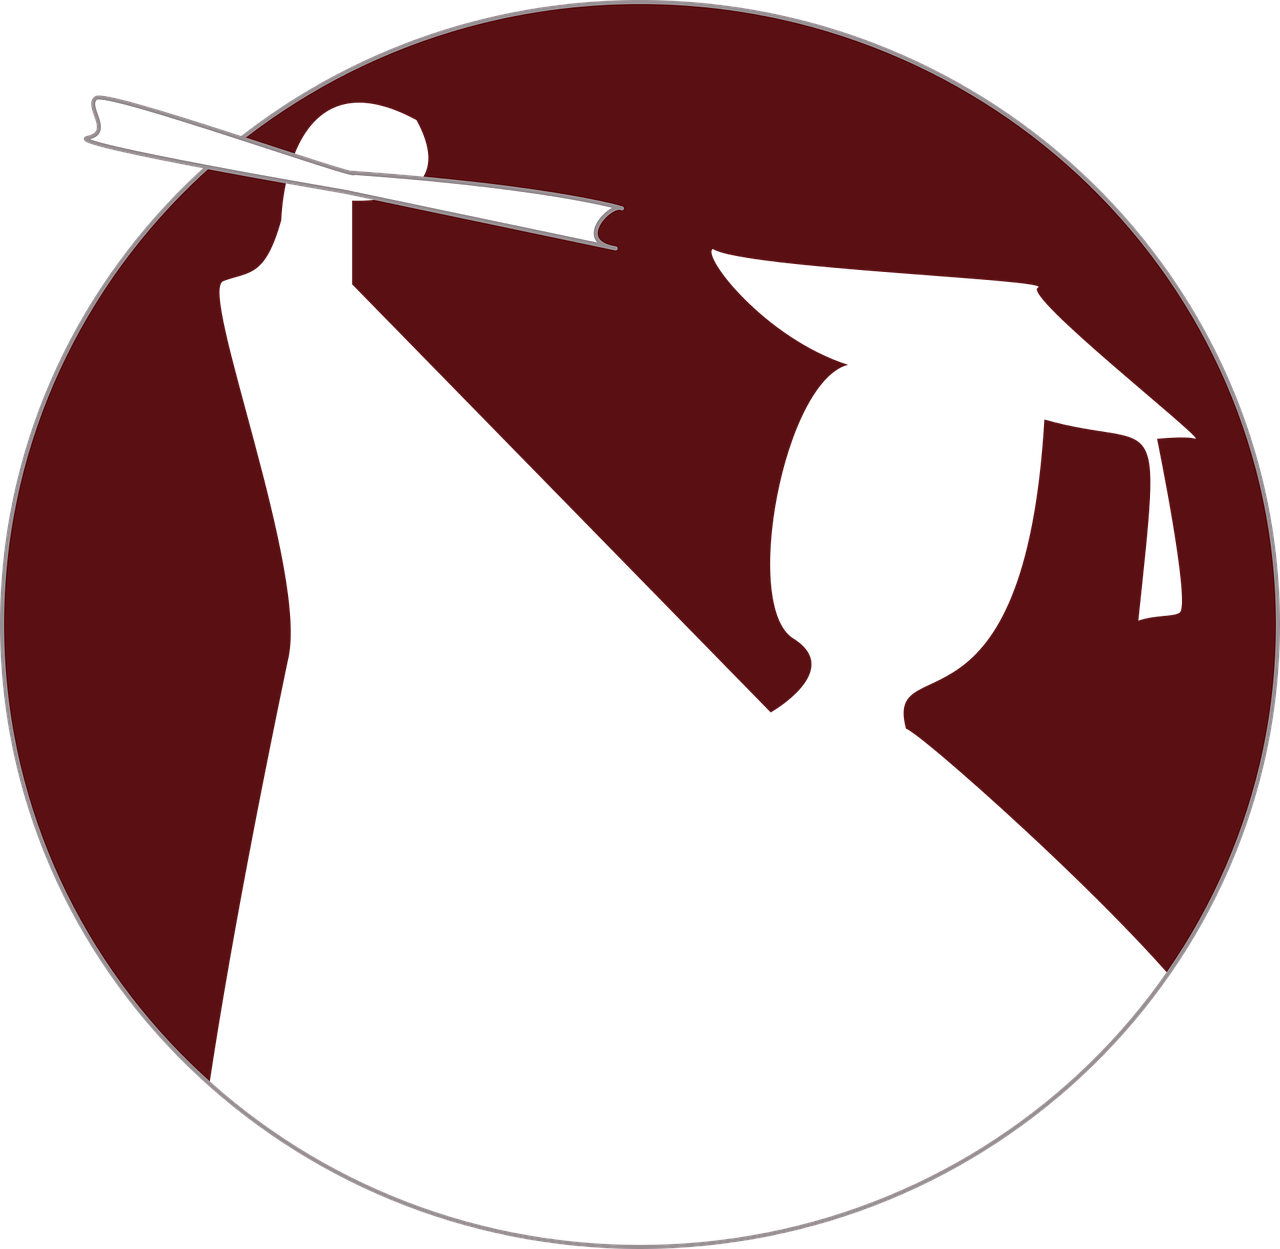 abstract image of a graduate with a diploma in hand